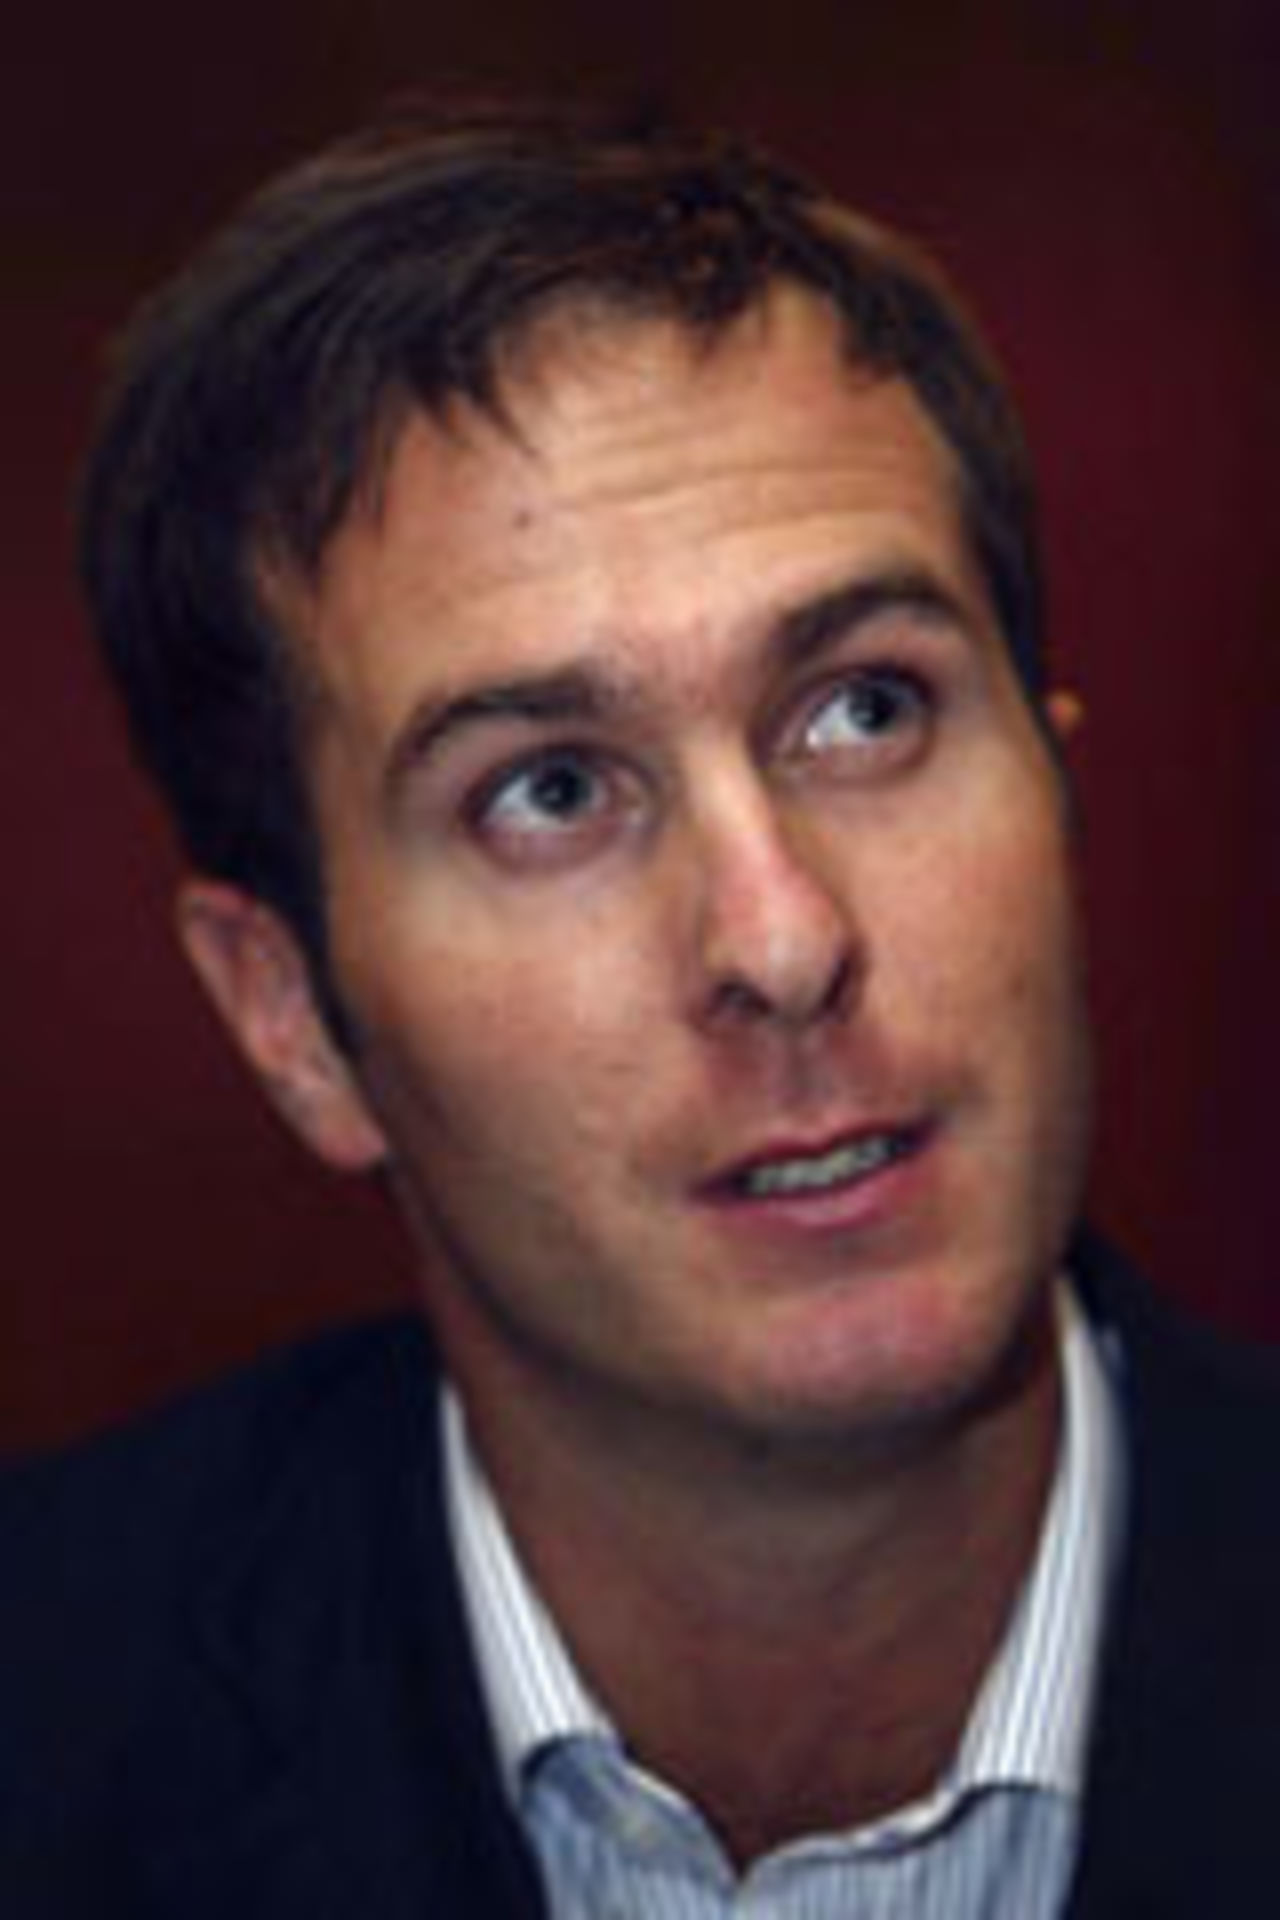 Michael Vaughan talks to the media ahead of the second Test between Bangladesh and England at Chittagong, October 27, 2003